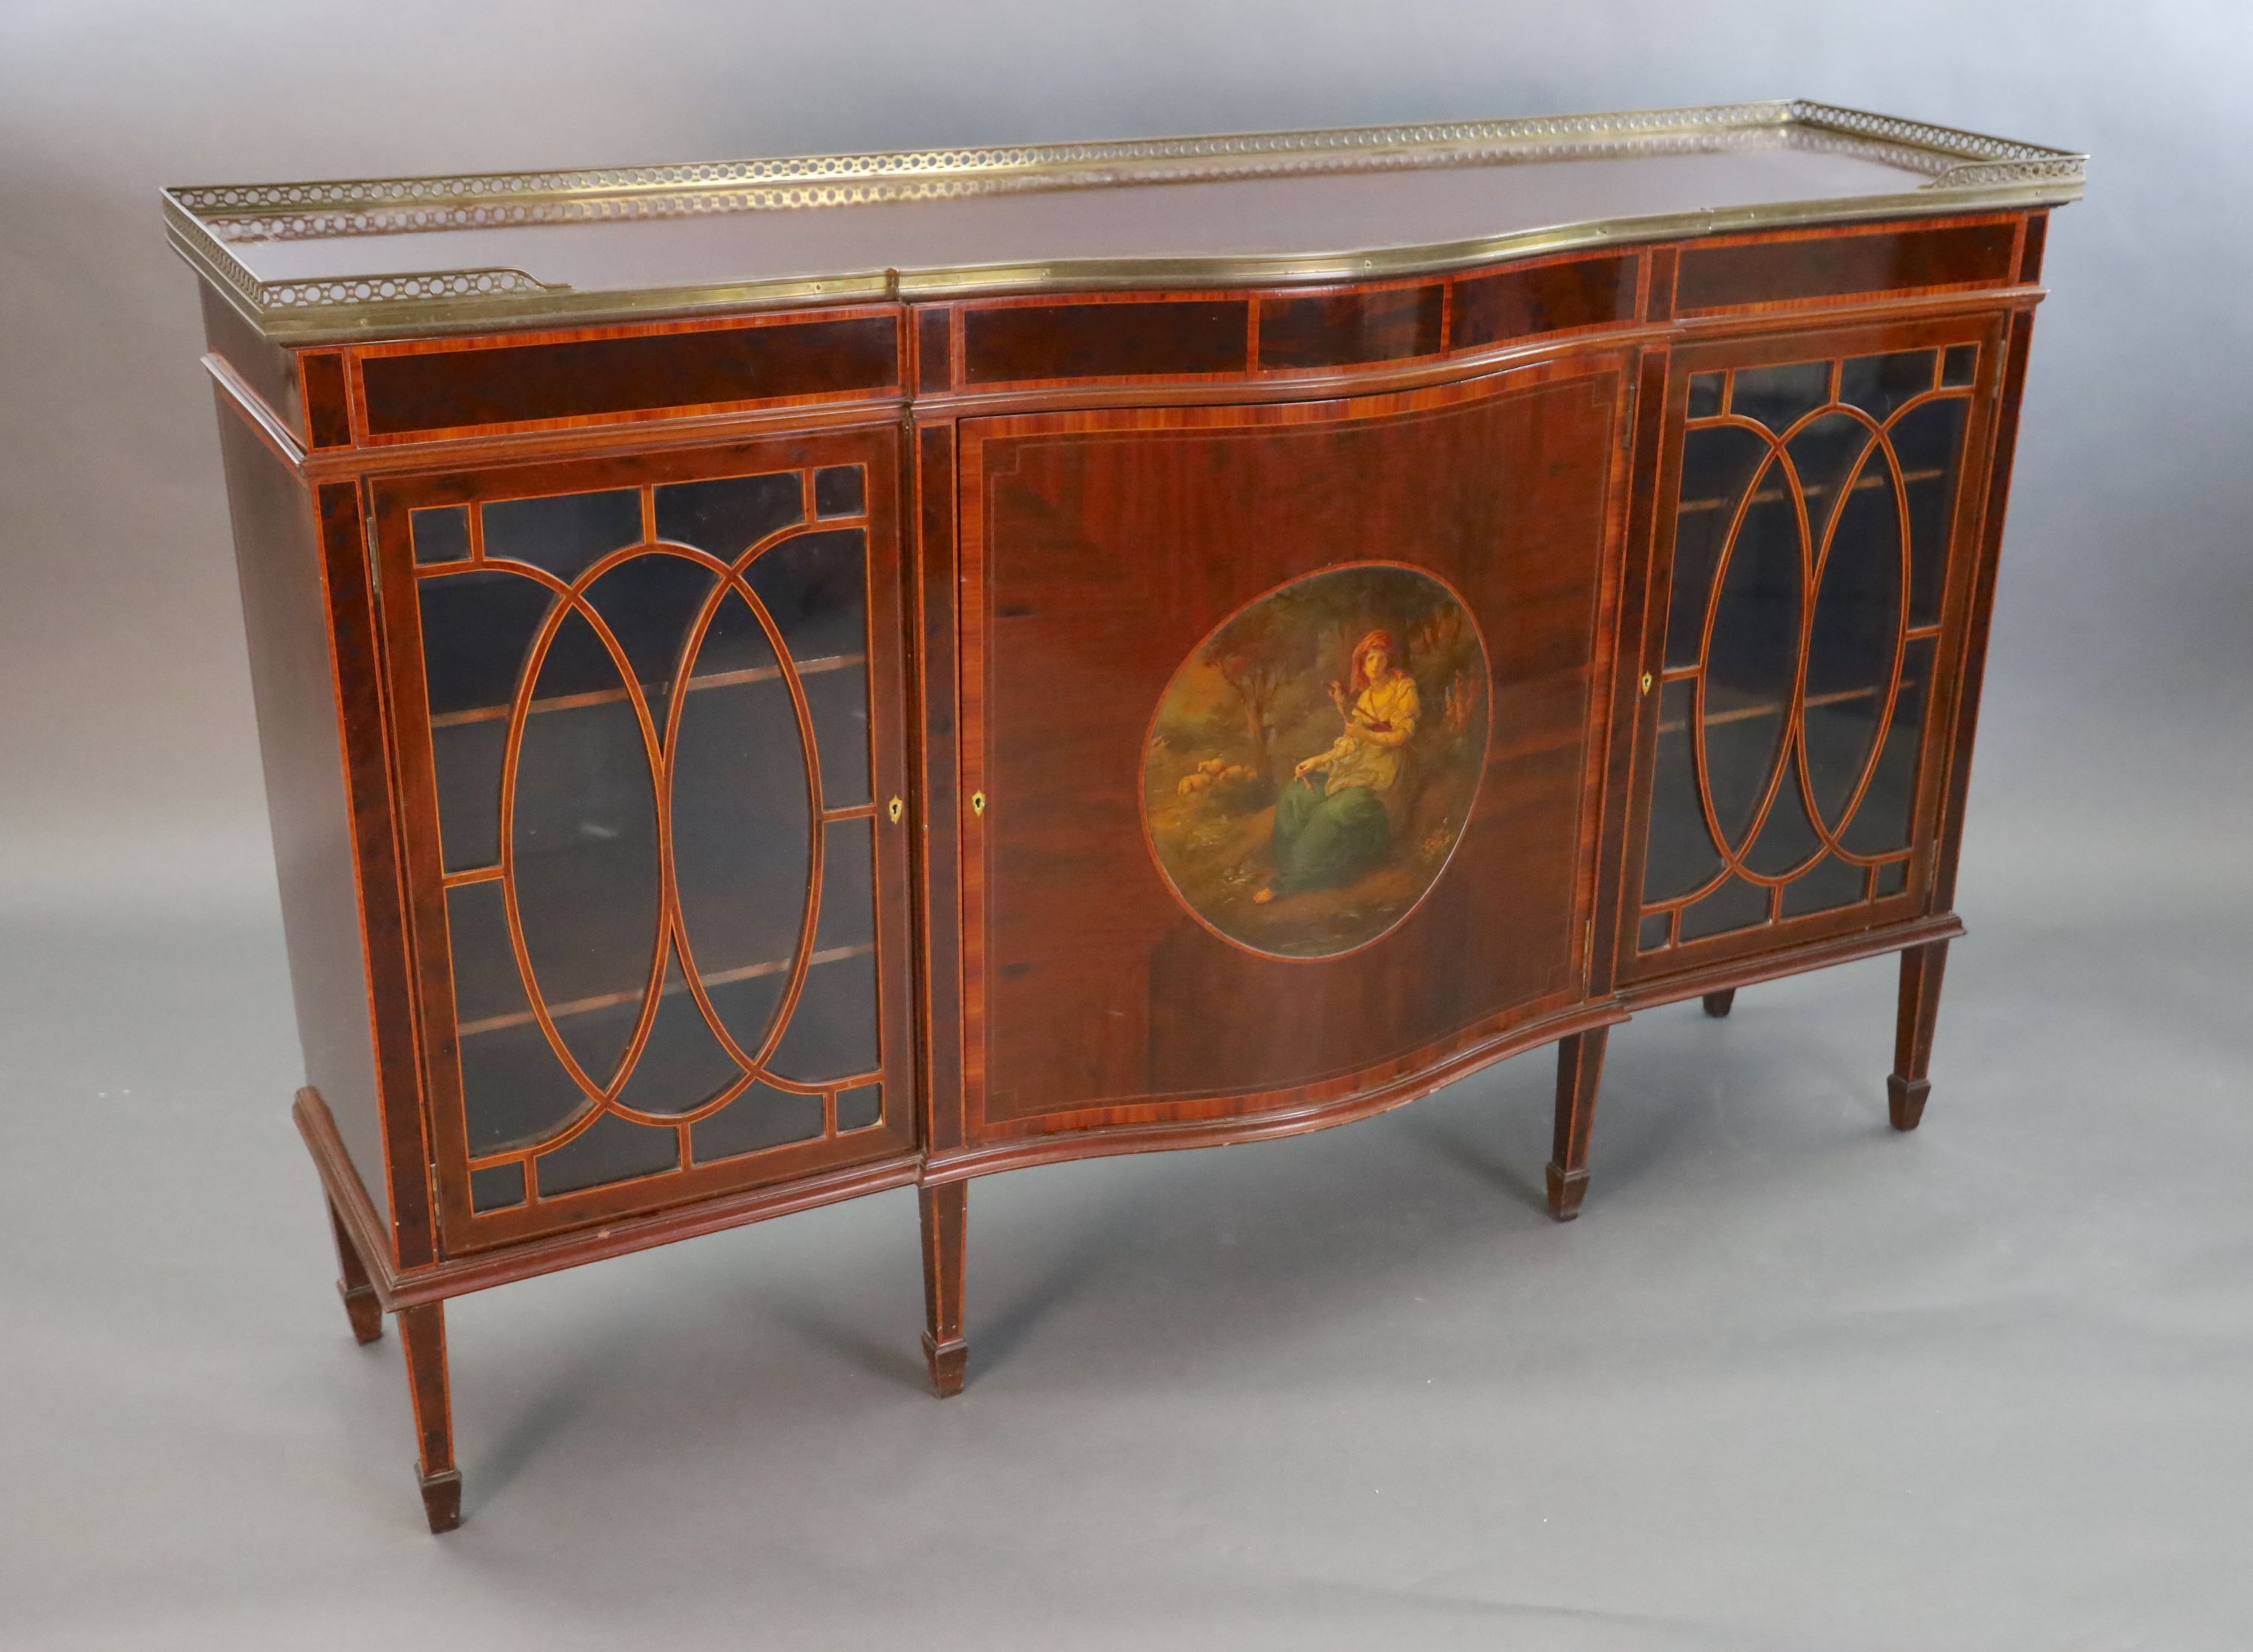 An Edwardian rosewood banded mahogany serpentine dwarf bookcase, W.5ft 1.5in. D.1ft 6in. H.3ft 3in.